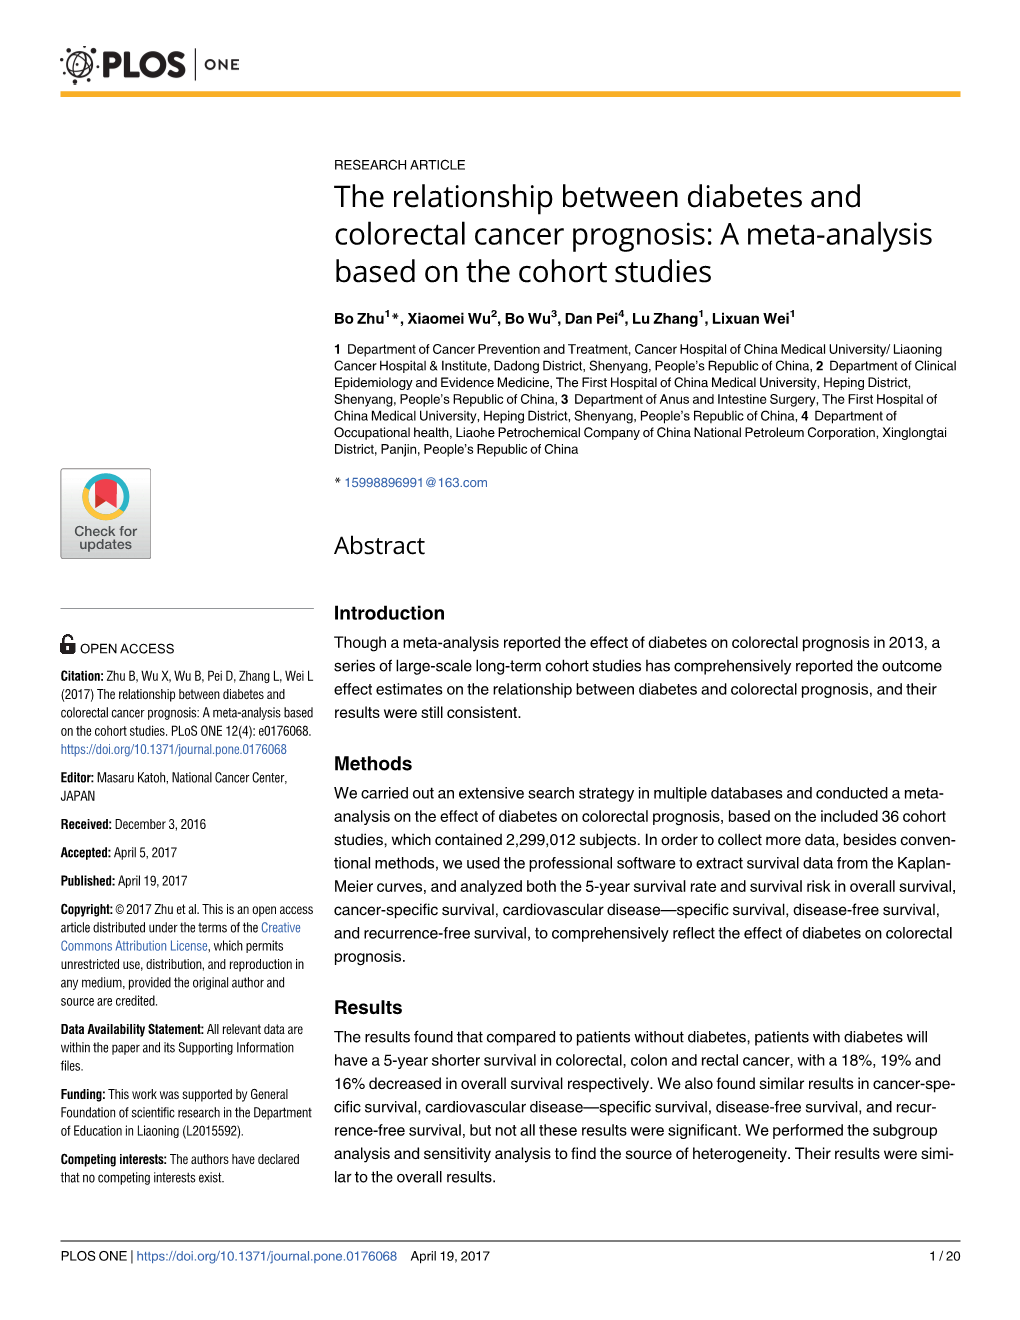 The Relationship Between Diabetes and Colorectal Cancer Prognosis: a Meta-Analysis Based on the Cohort Studies